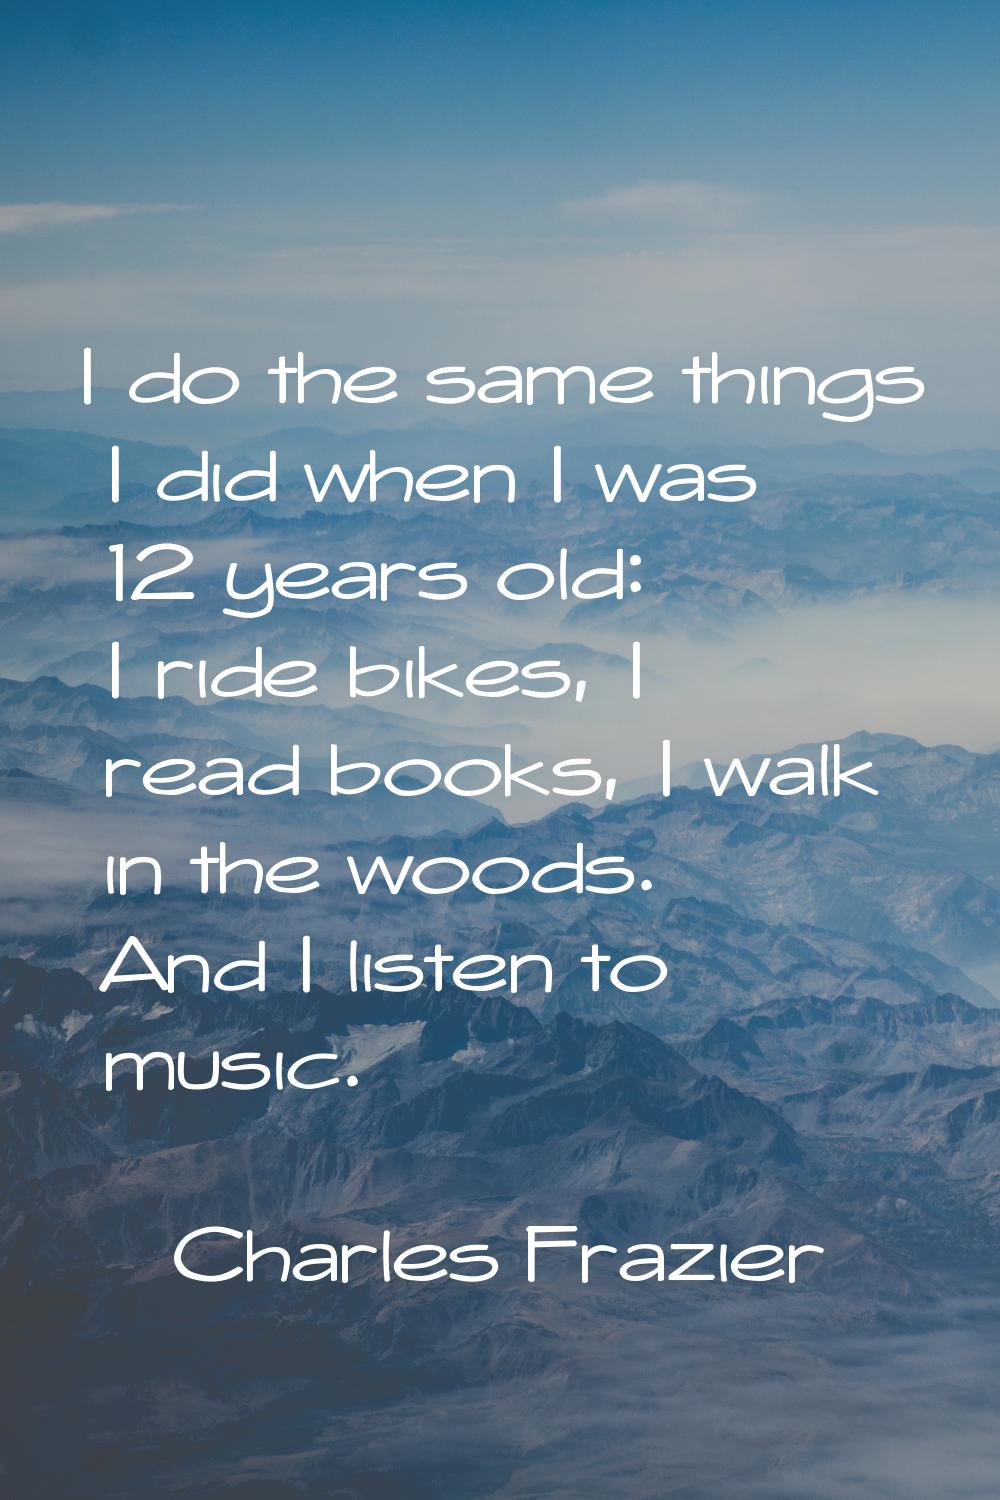 I do the same things I did when I was 12 years old: I ride bikes, I read books, I walk in the woods